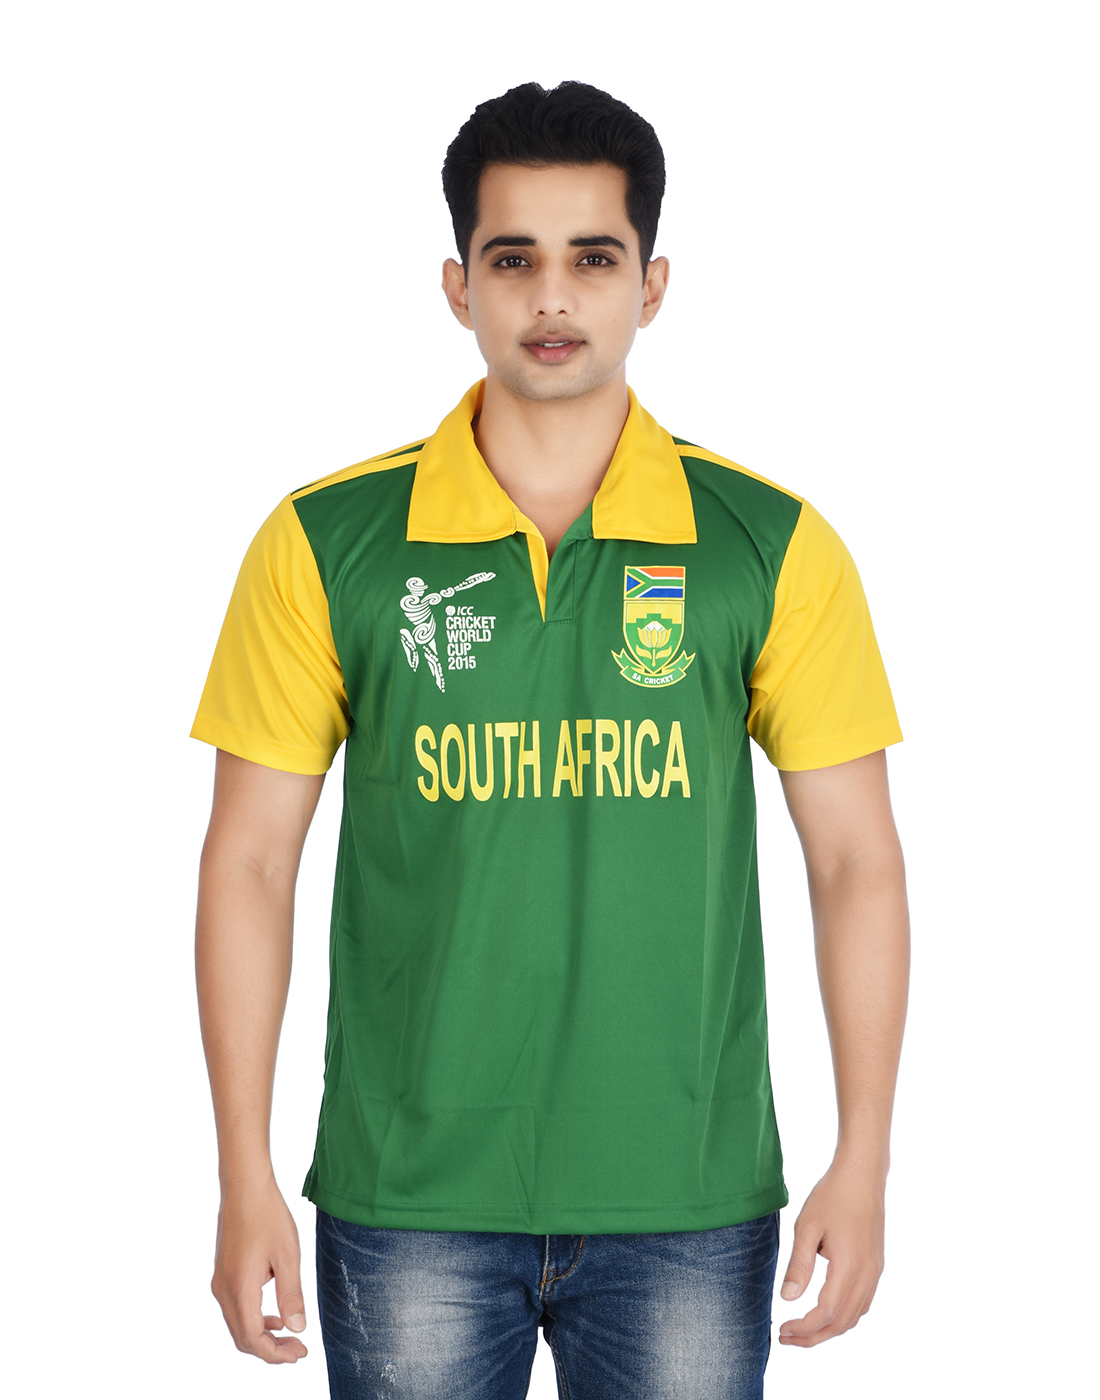 Buy South Africa Cricket Jersey Half Sleeves T Shirt Online @ ₹499 from ...